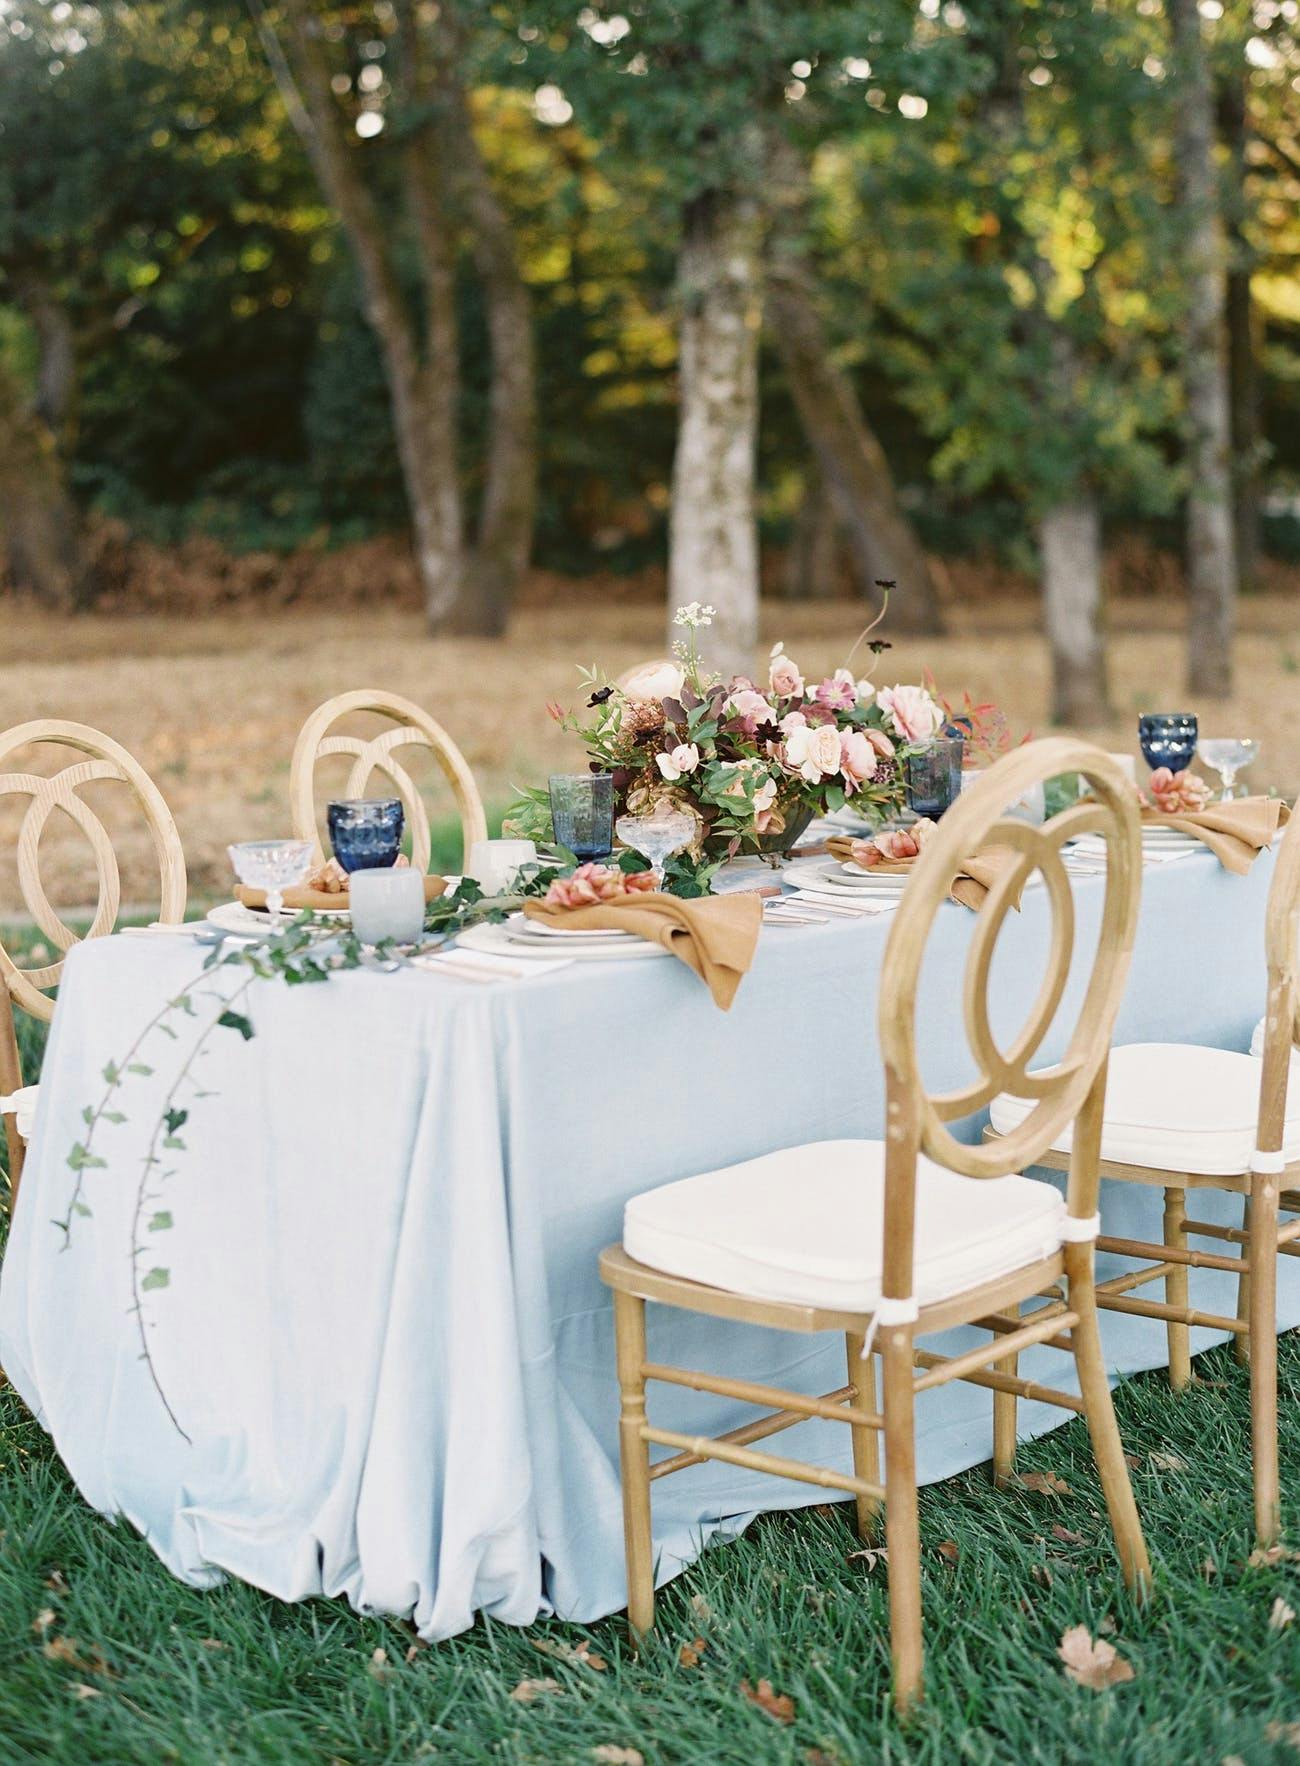 Small outdoor wedding reception table with rustic centerpieces.